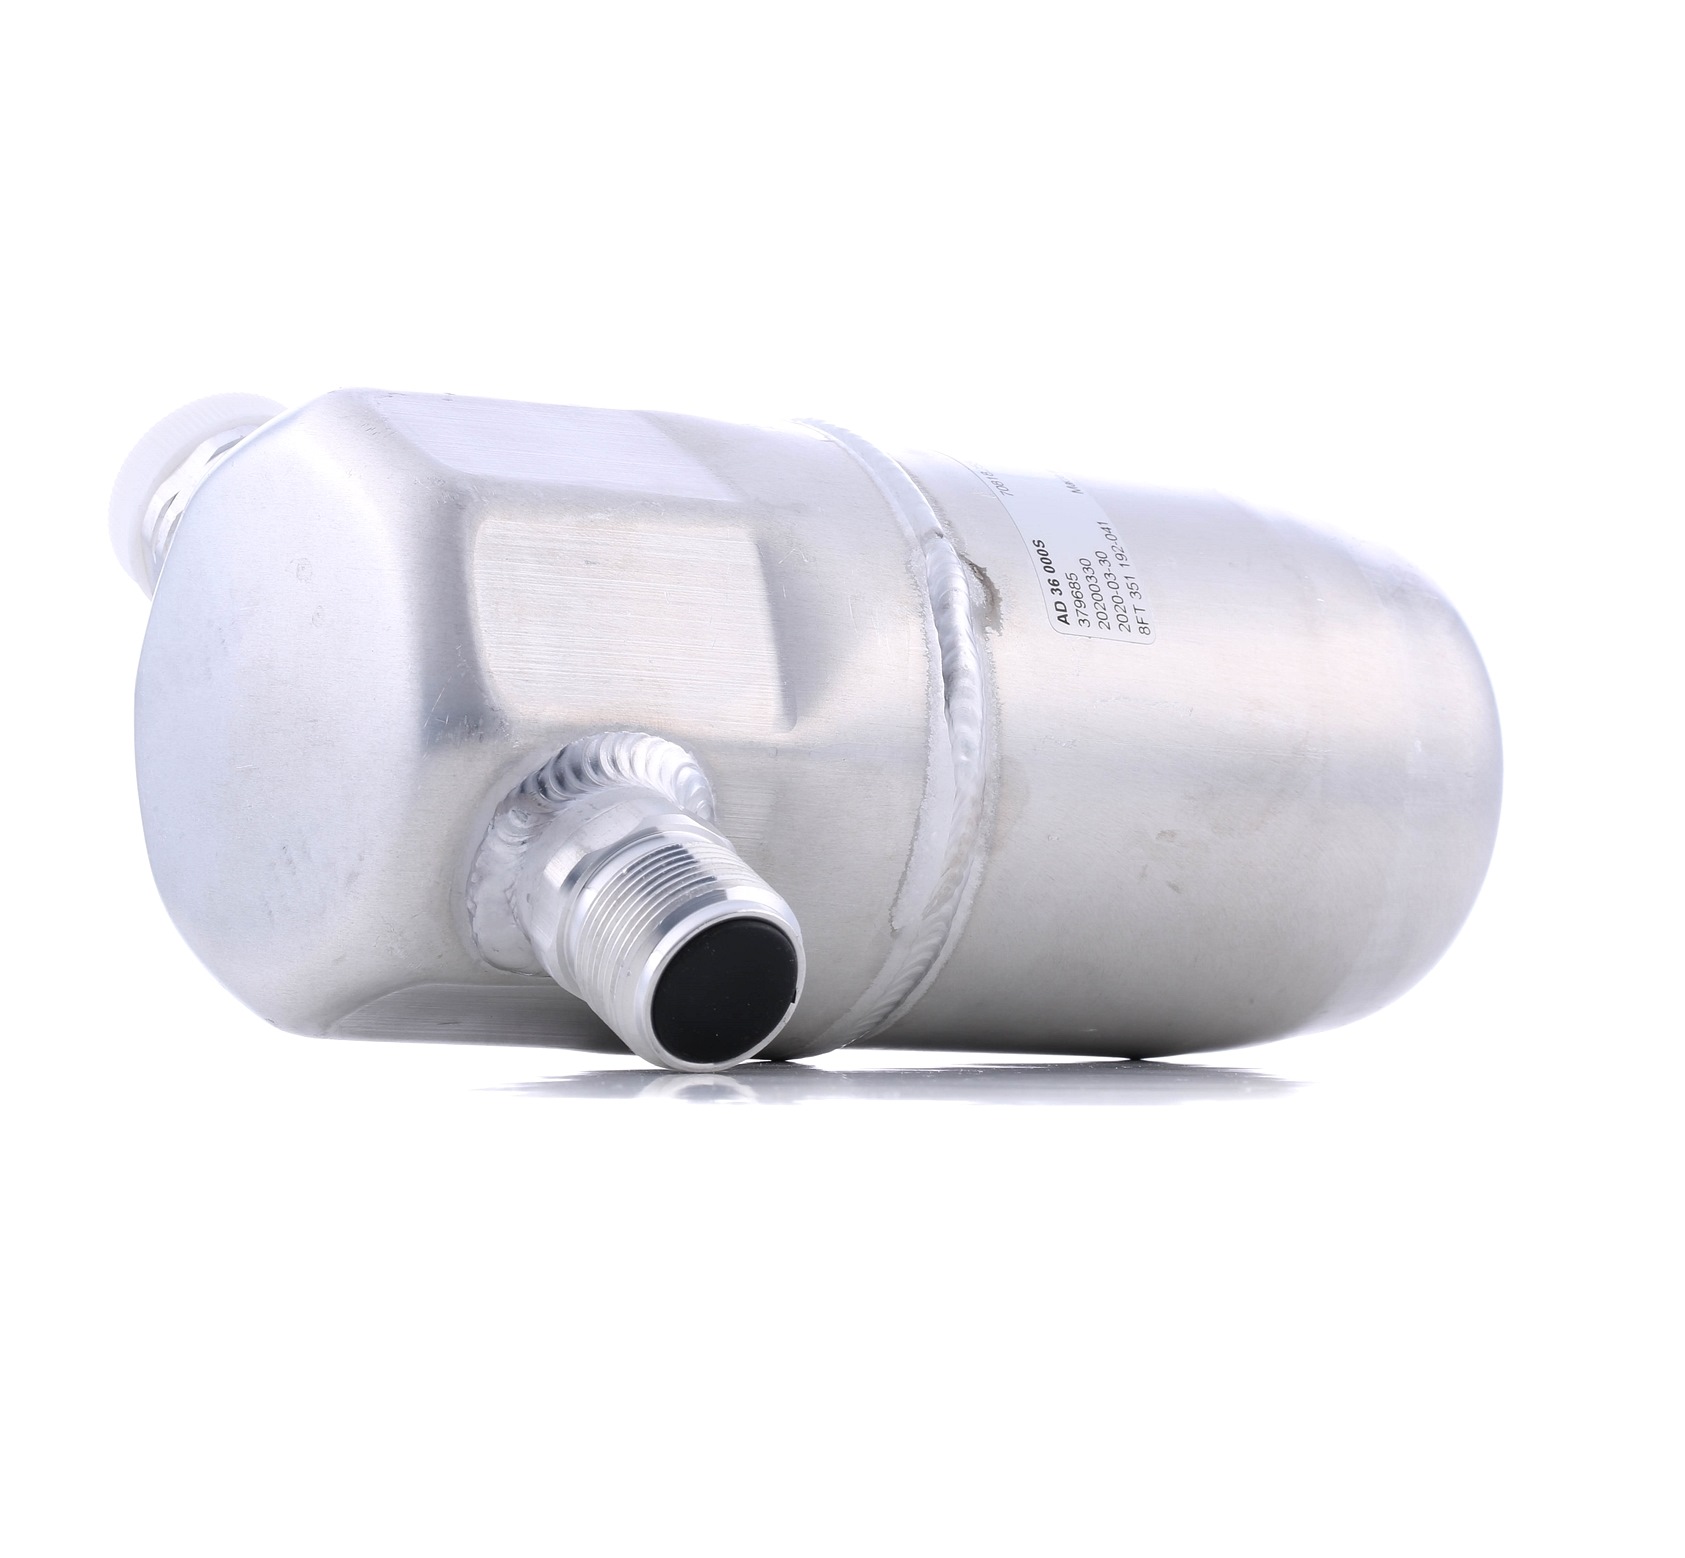 Image of MAHLE ORIGINAL Receiver Drier VW,AUDI AD 36 000S 4B0260774,4B0820192,4B0820193 AC Dryer,Air Conditioning Dryer,Dryer, air conditioning 8A0820191